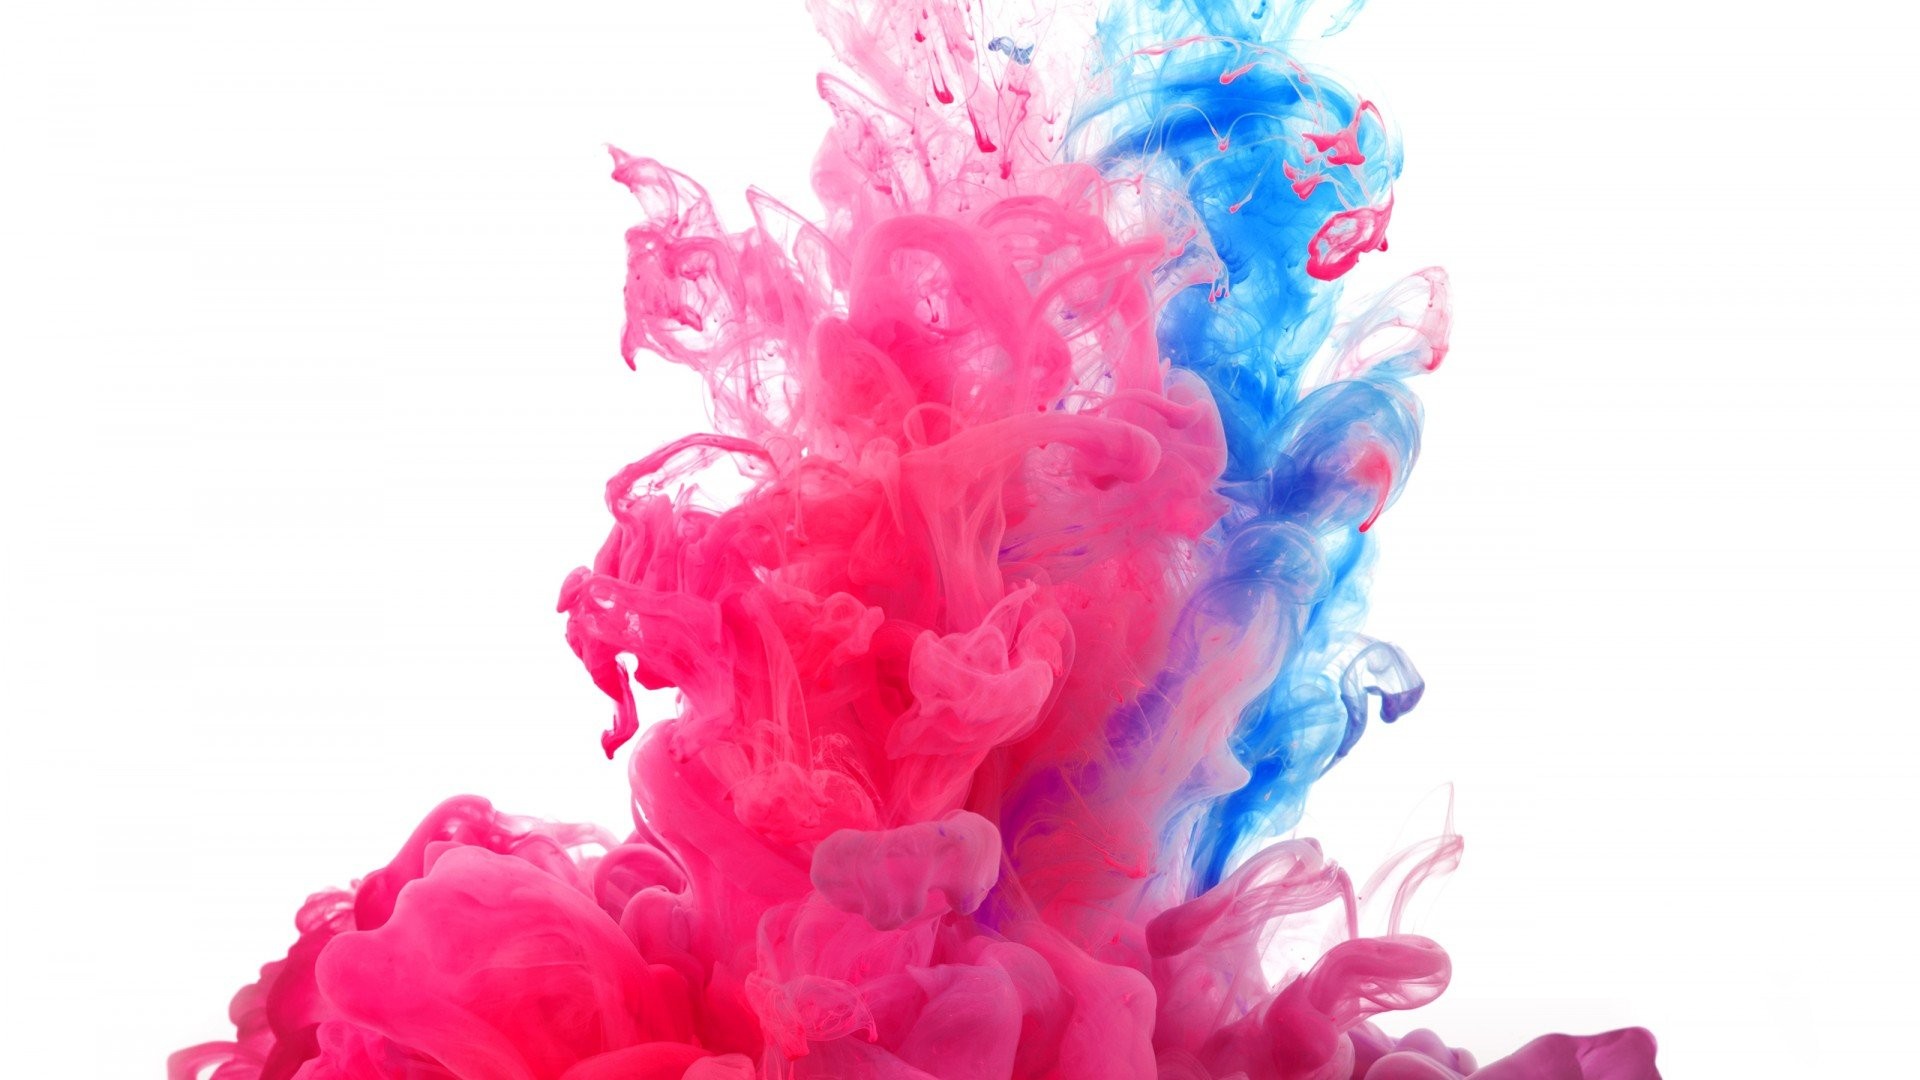 Hd Wallpapers, Background Images, Smoke,pink, Apple, - Pink And Blue Smoke - HD Wallpaper 